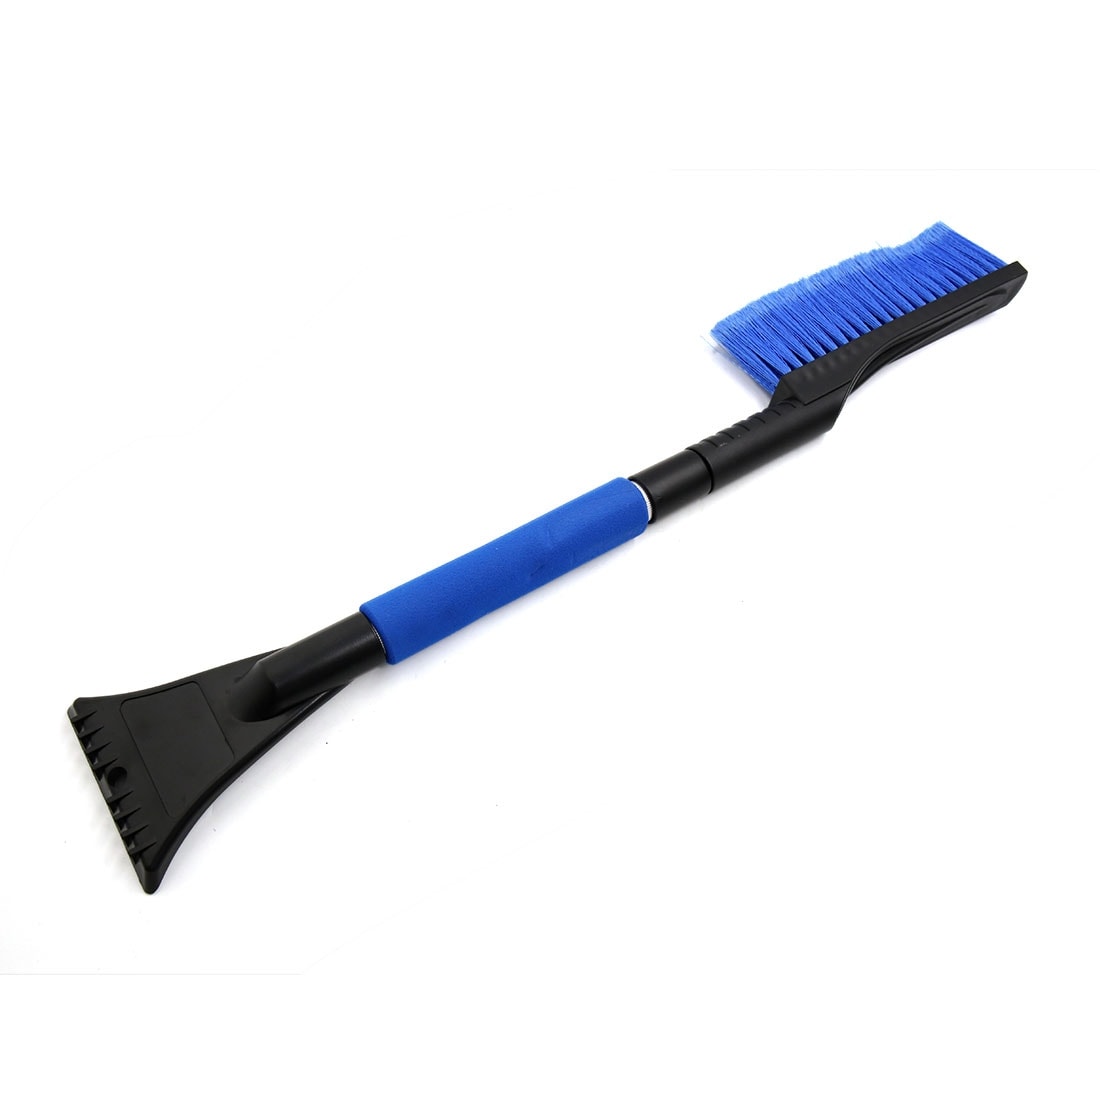 EUBUY Car Ice Scraper Frost Snow Remover with Foam Handle for Car